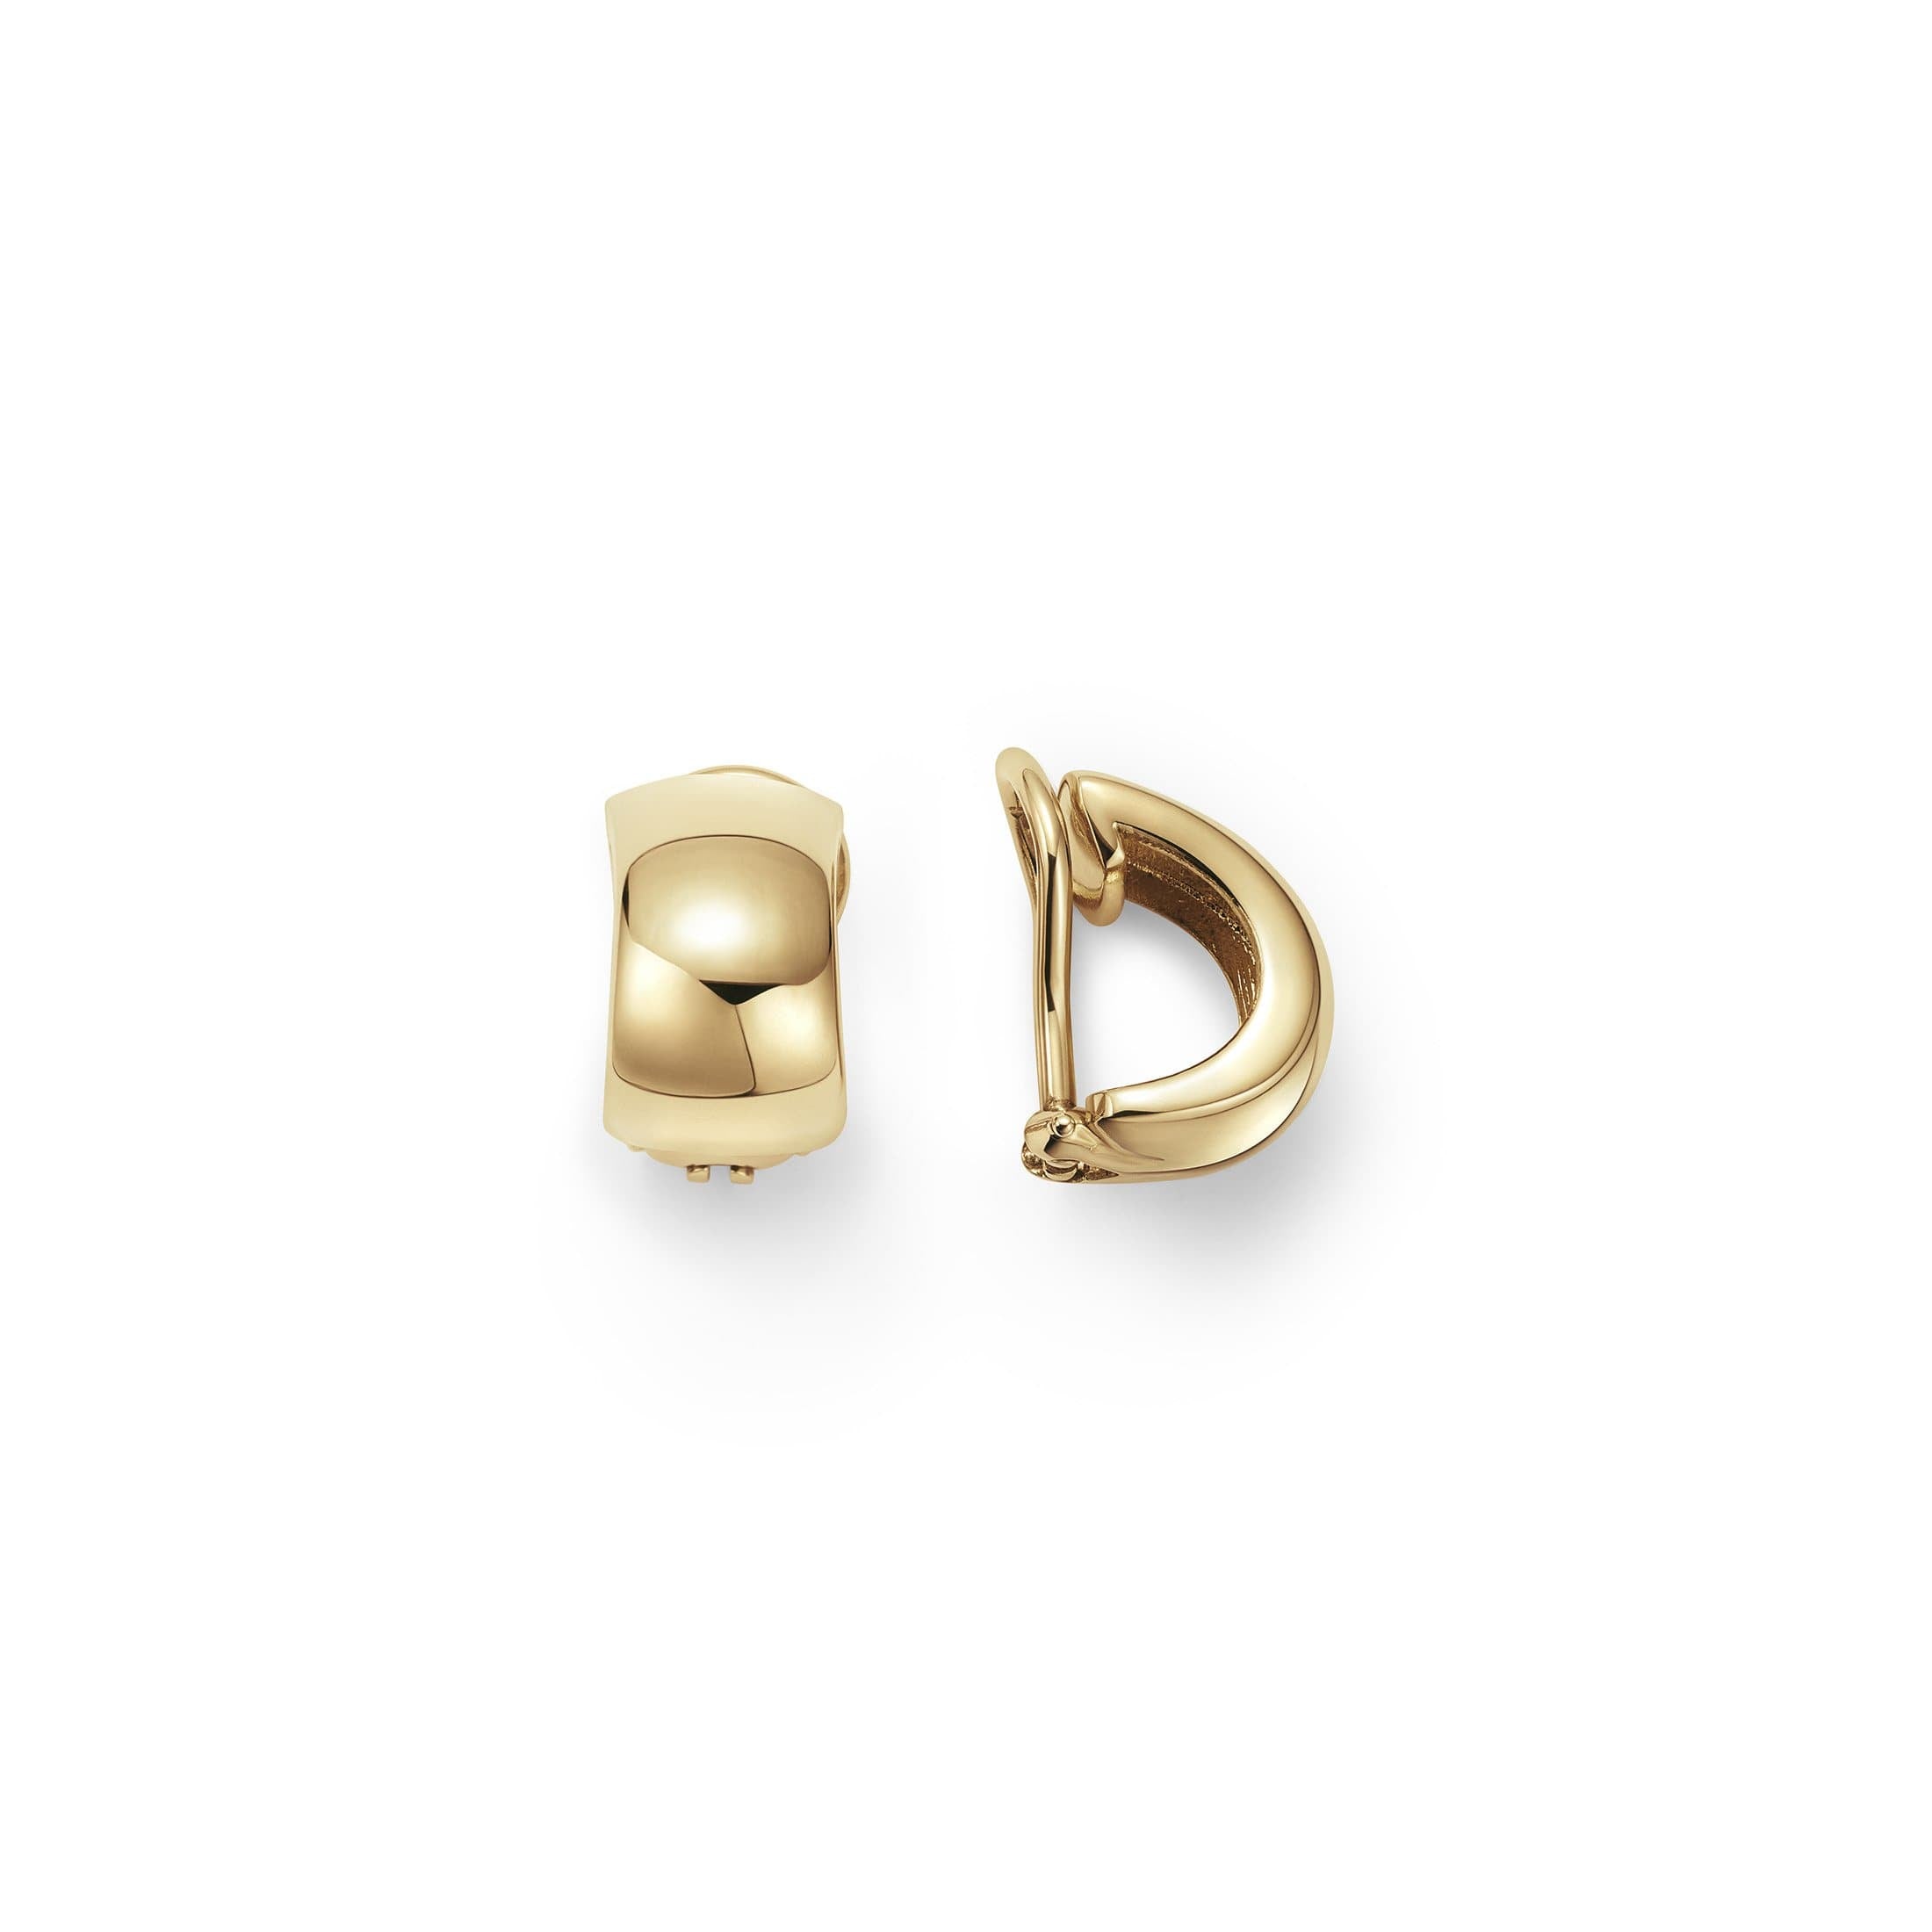 Eco-Friendly Gold Uptown Earrings Made in NYC